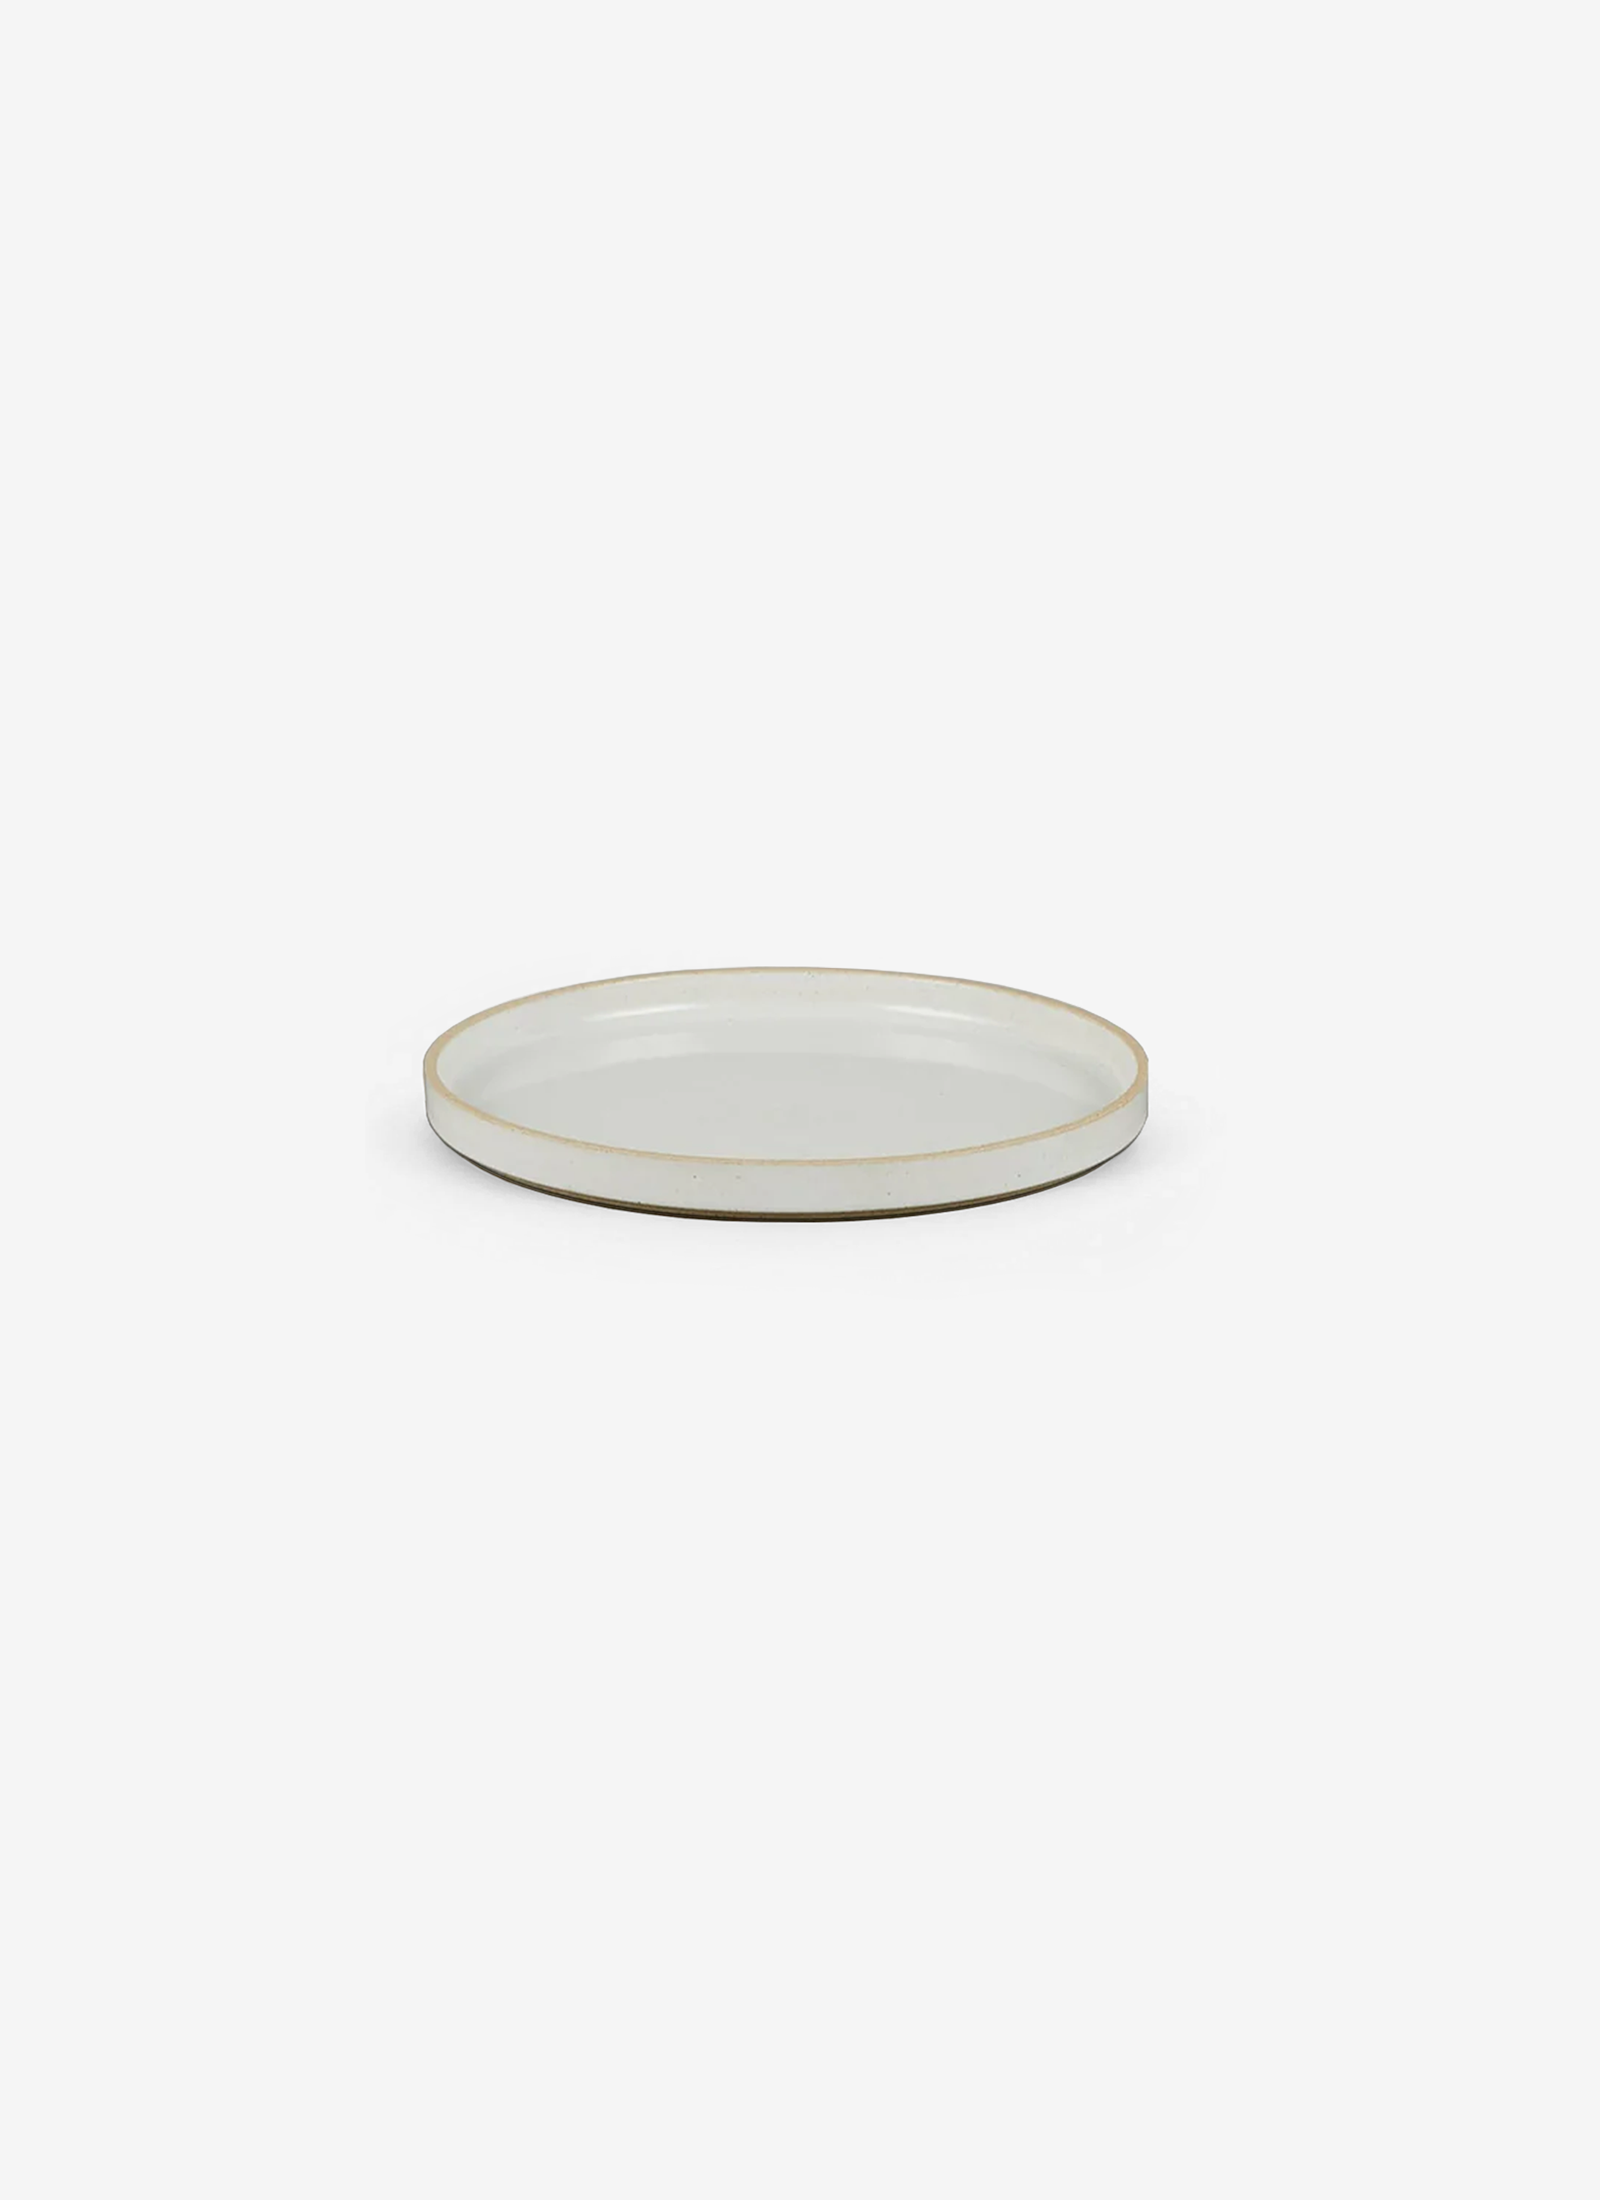 Grey Lunch Plates - set of 4